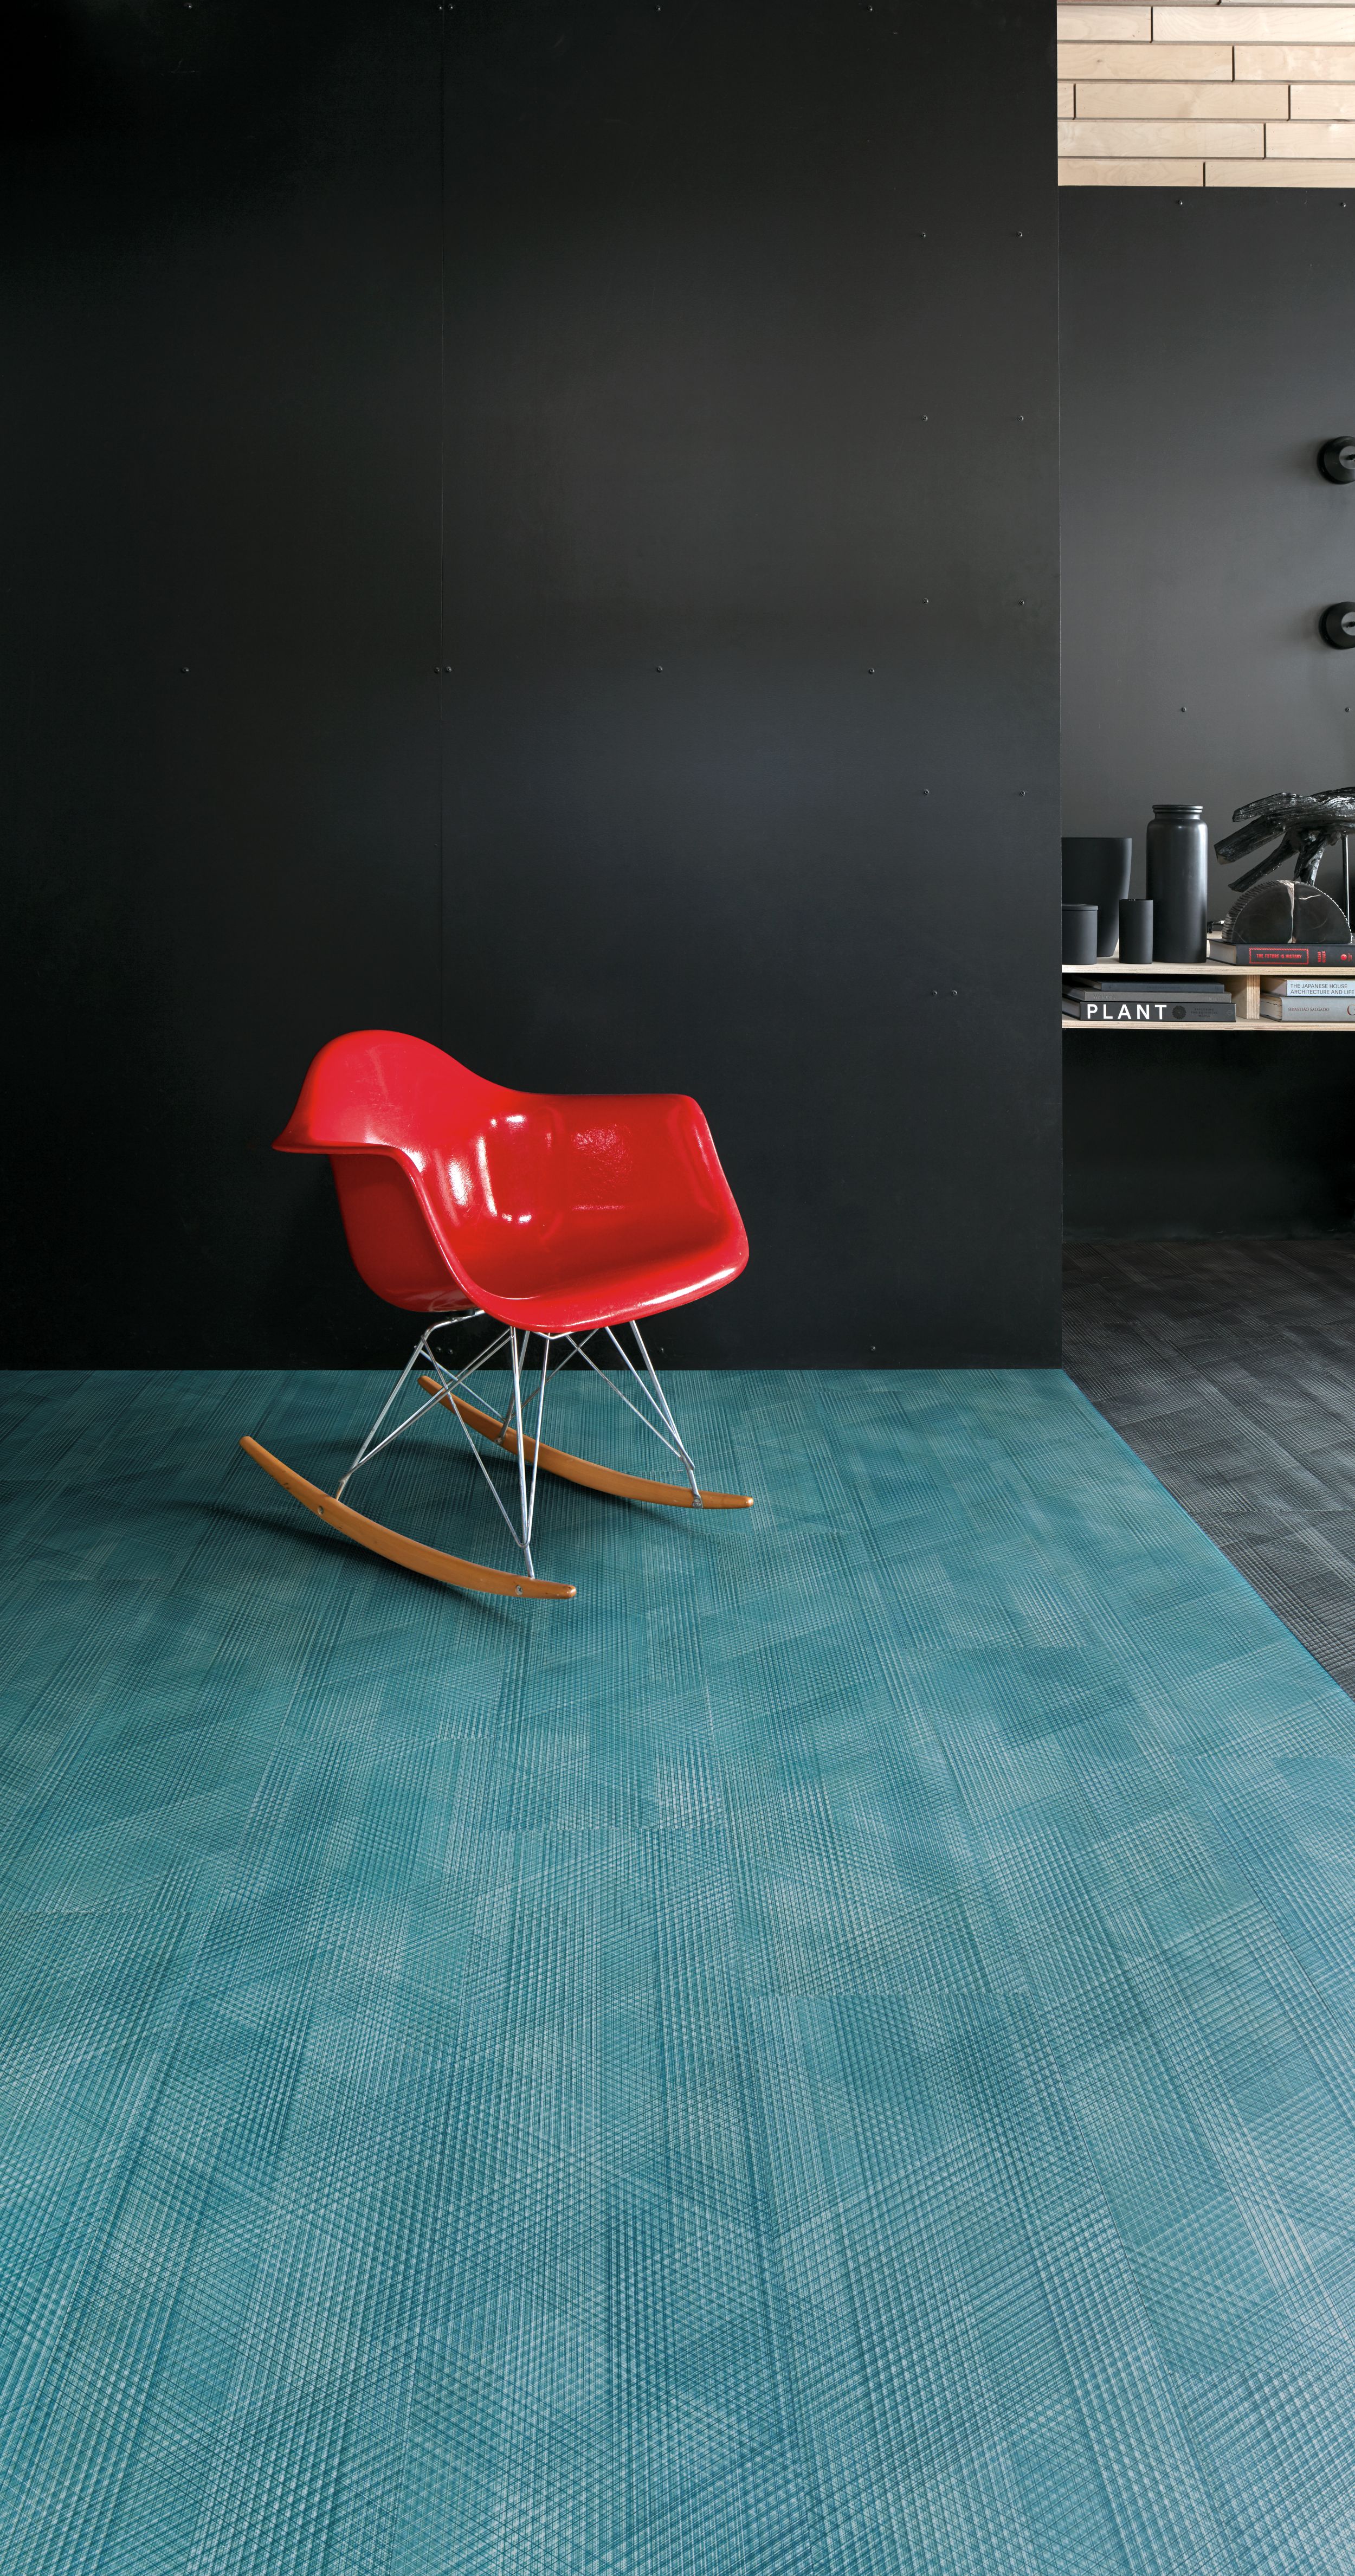 Interface Drawn Lines LVT in common area with red rocking chair  Bildnummer 4